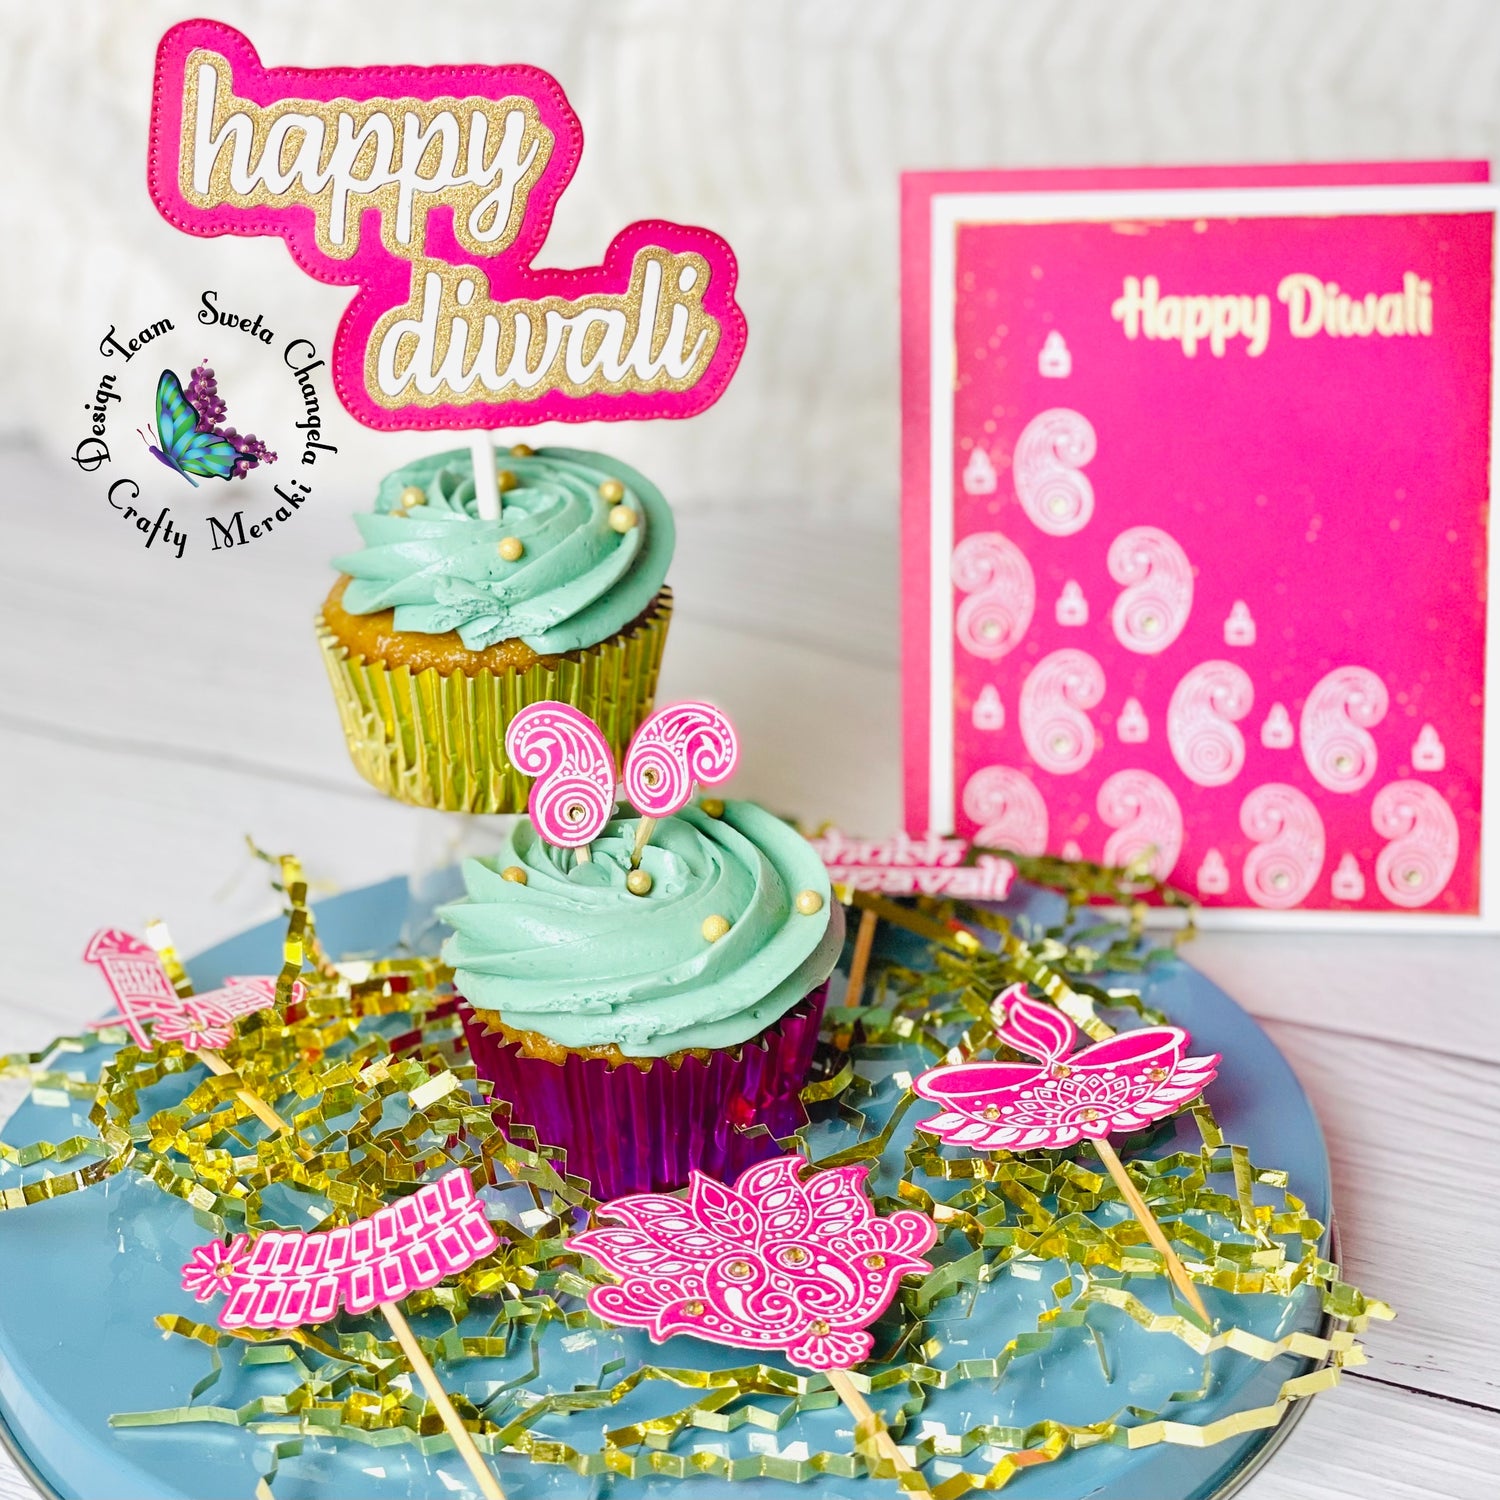 Festive cupcake toppers by Sweta